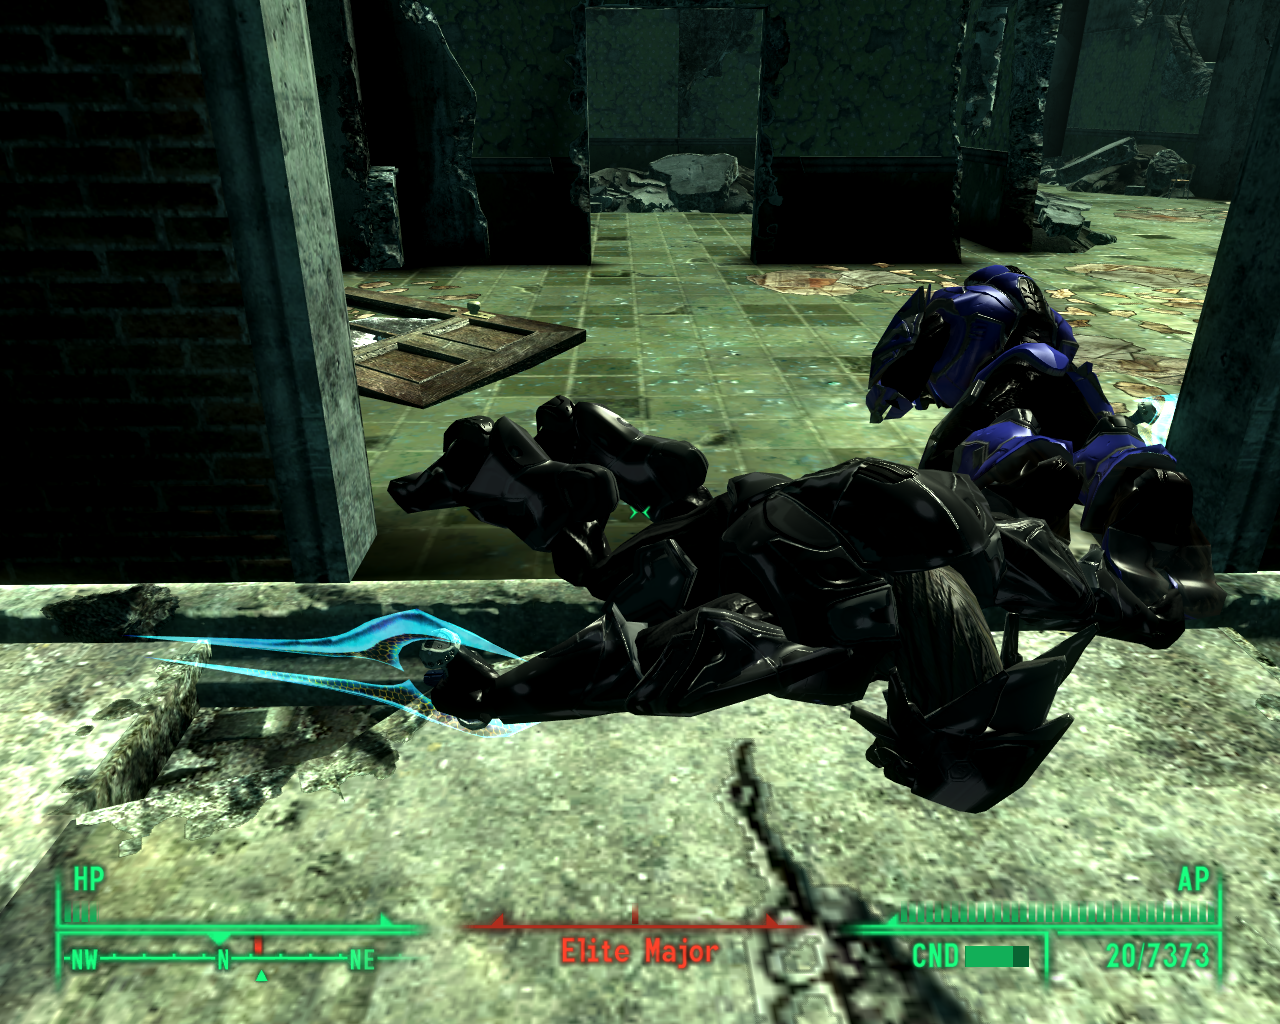 New Elites image - Halout 3 mod for Fallout 3 - ModDB